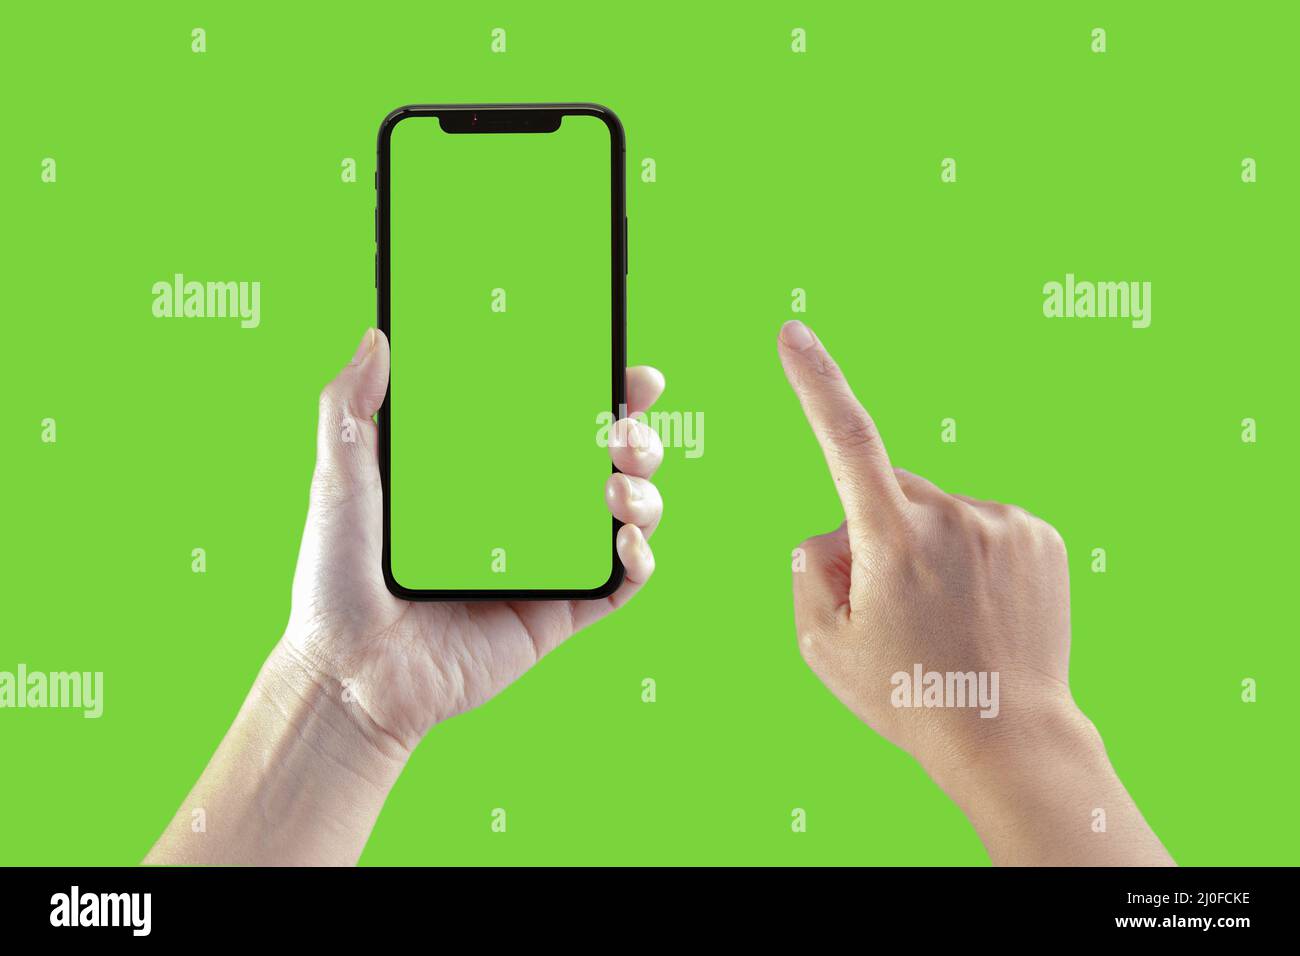 A Black Smart phone hold by a person on a green screen Stock Photo